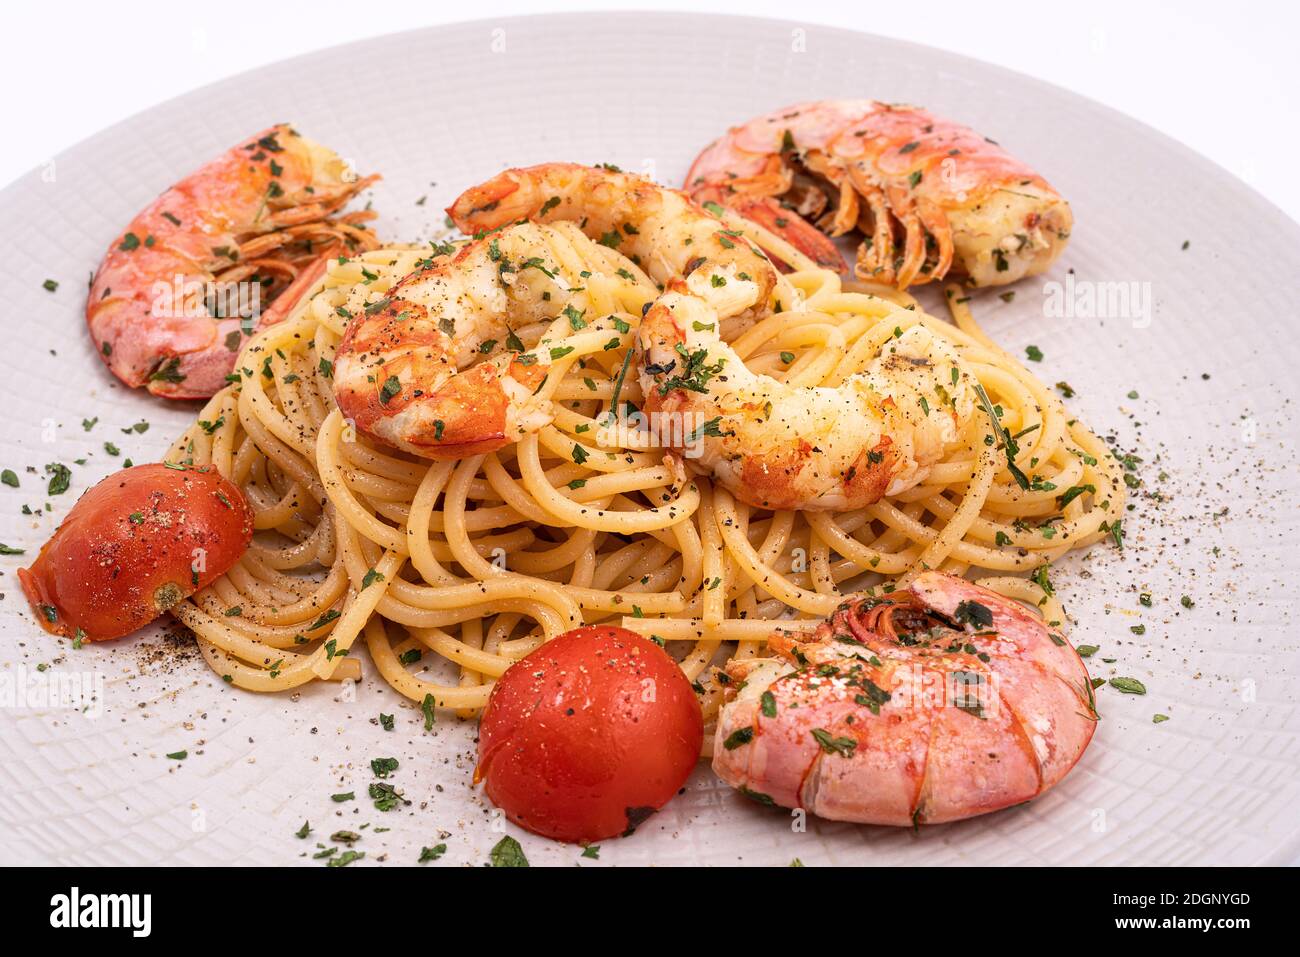 a plate with spaghetti and prawns Stock Photo